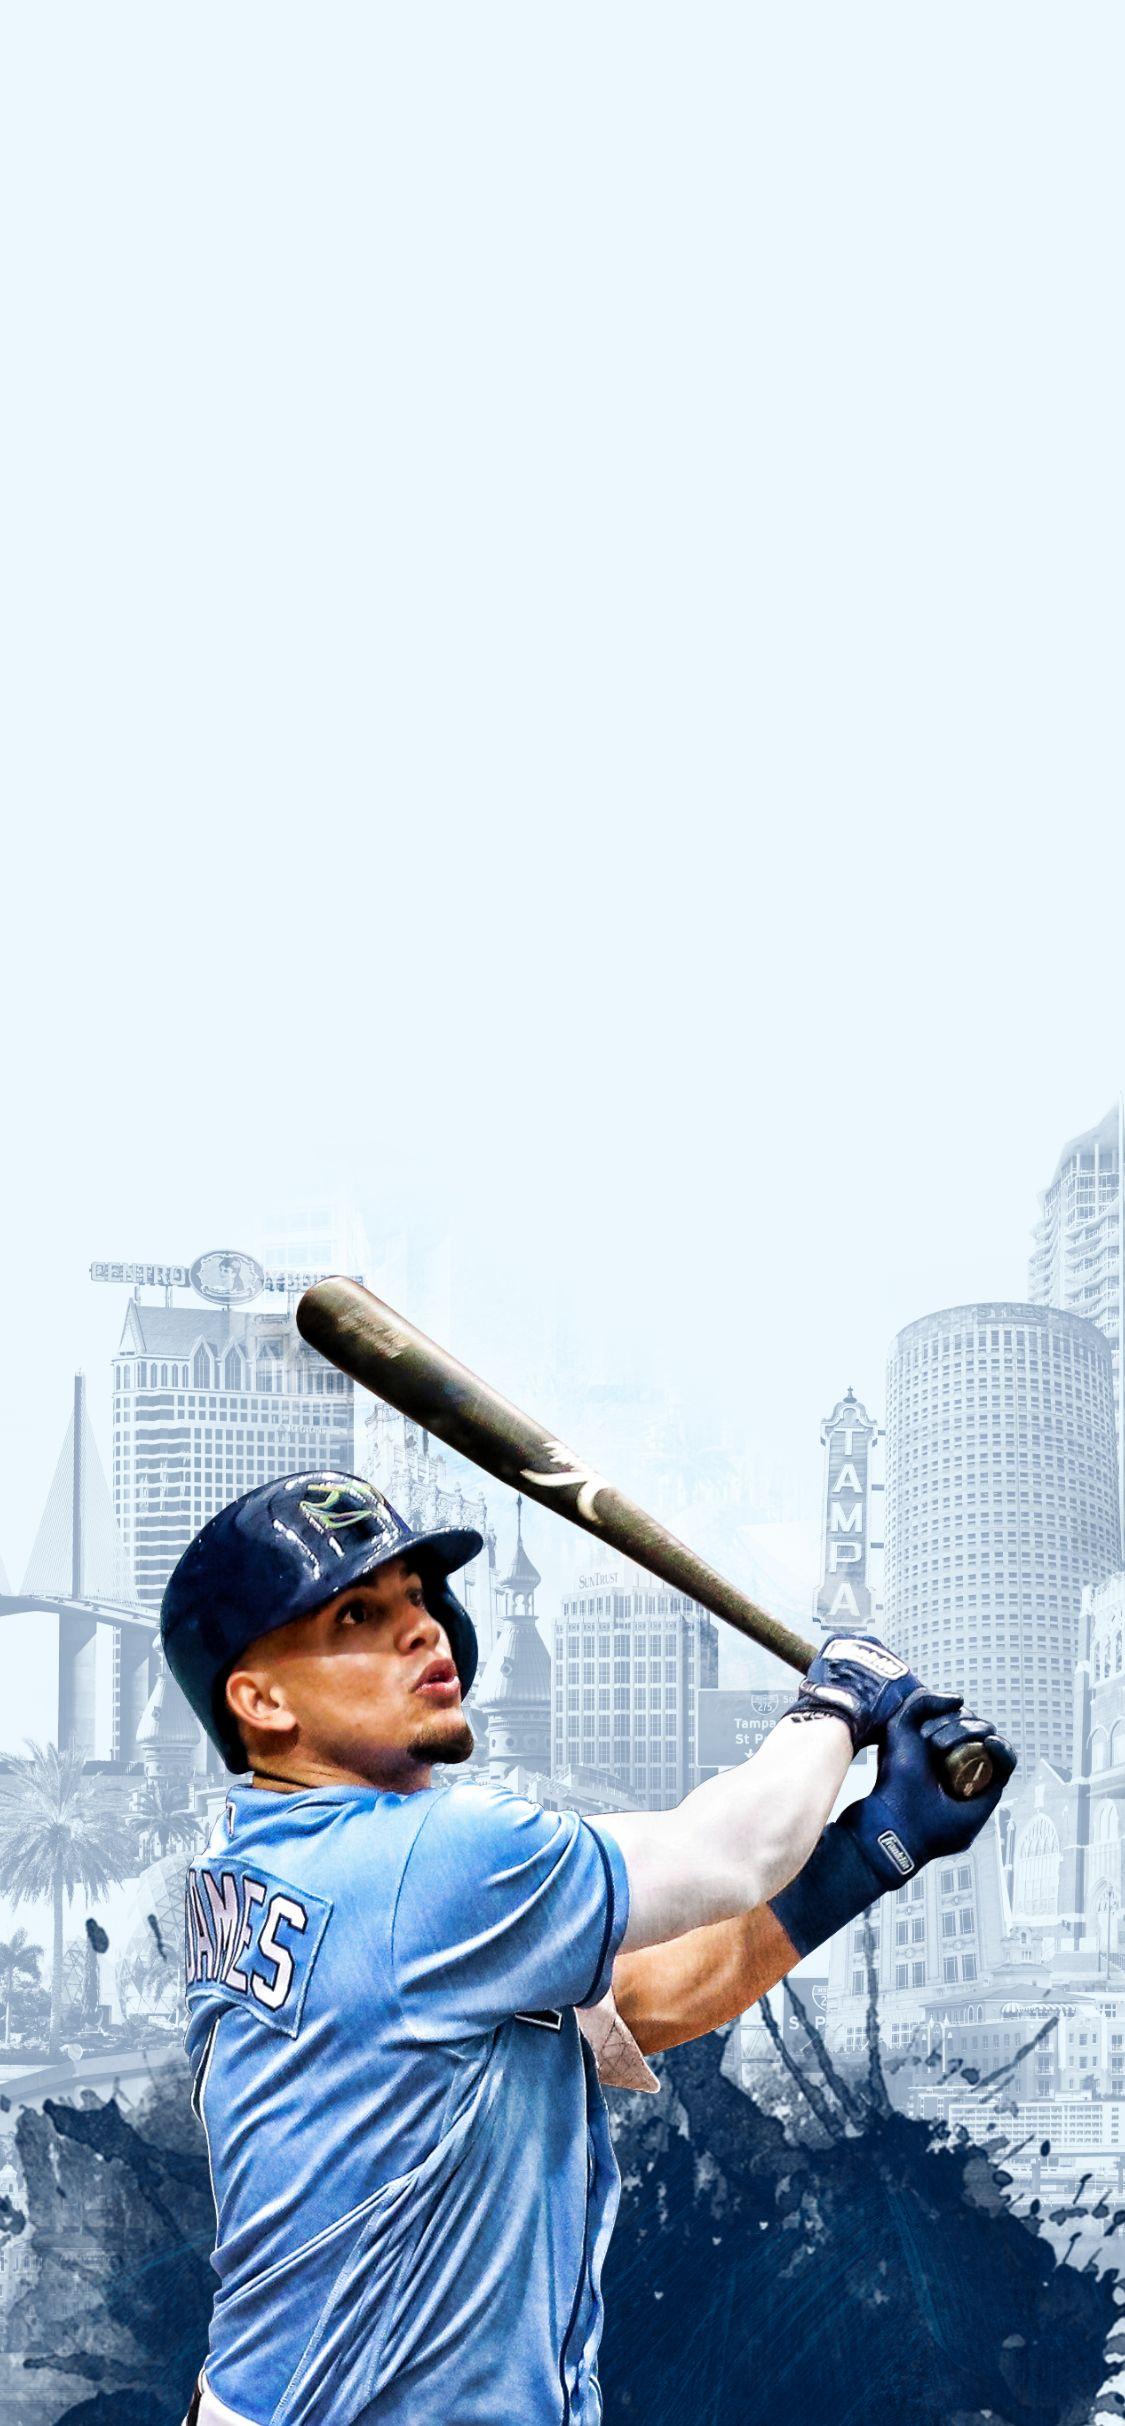 Tampa Bay Rays wallpaper by counsellornh - Download on ZEDGE™